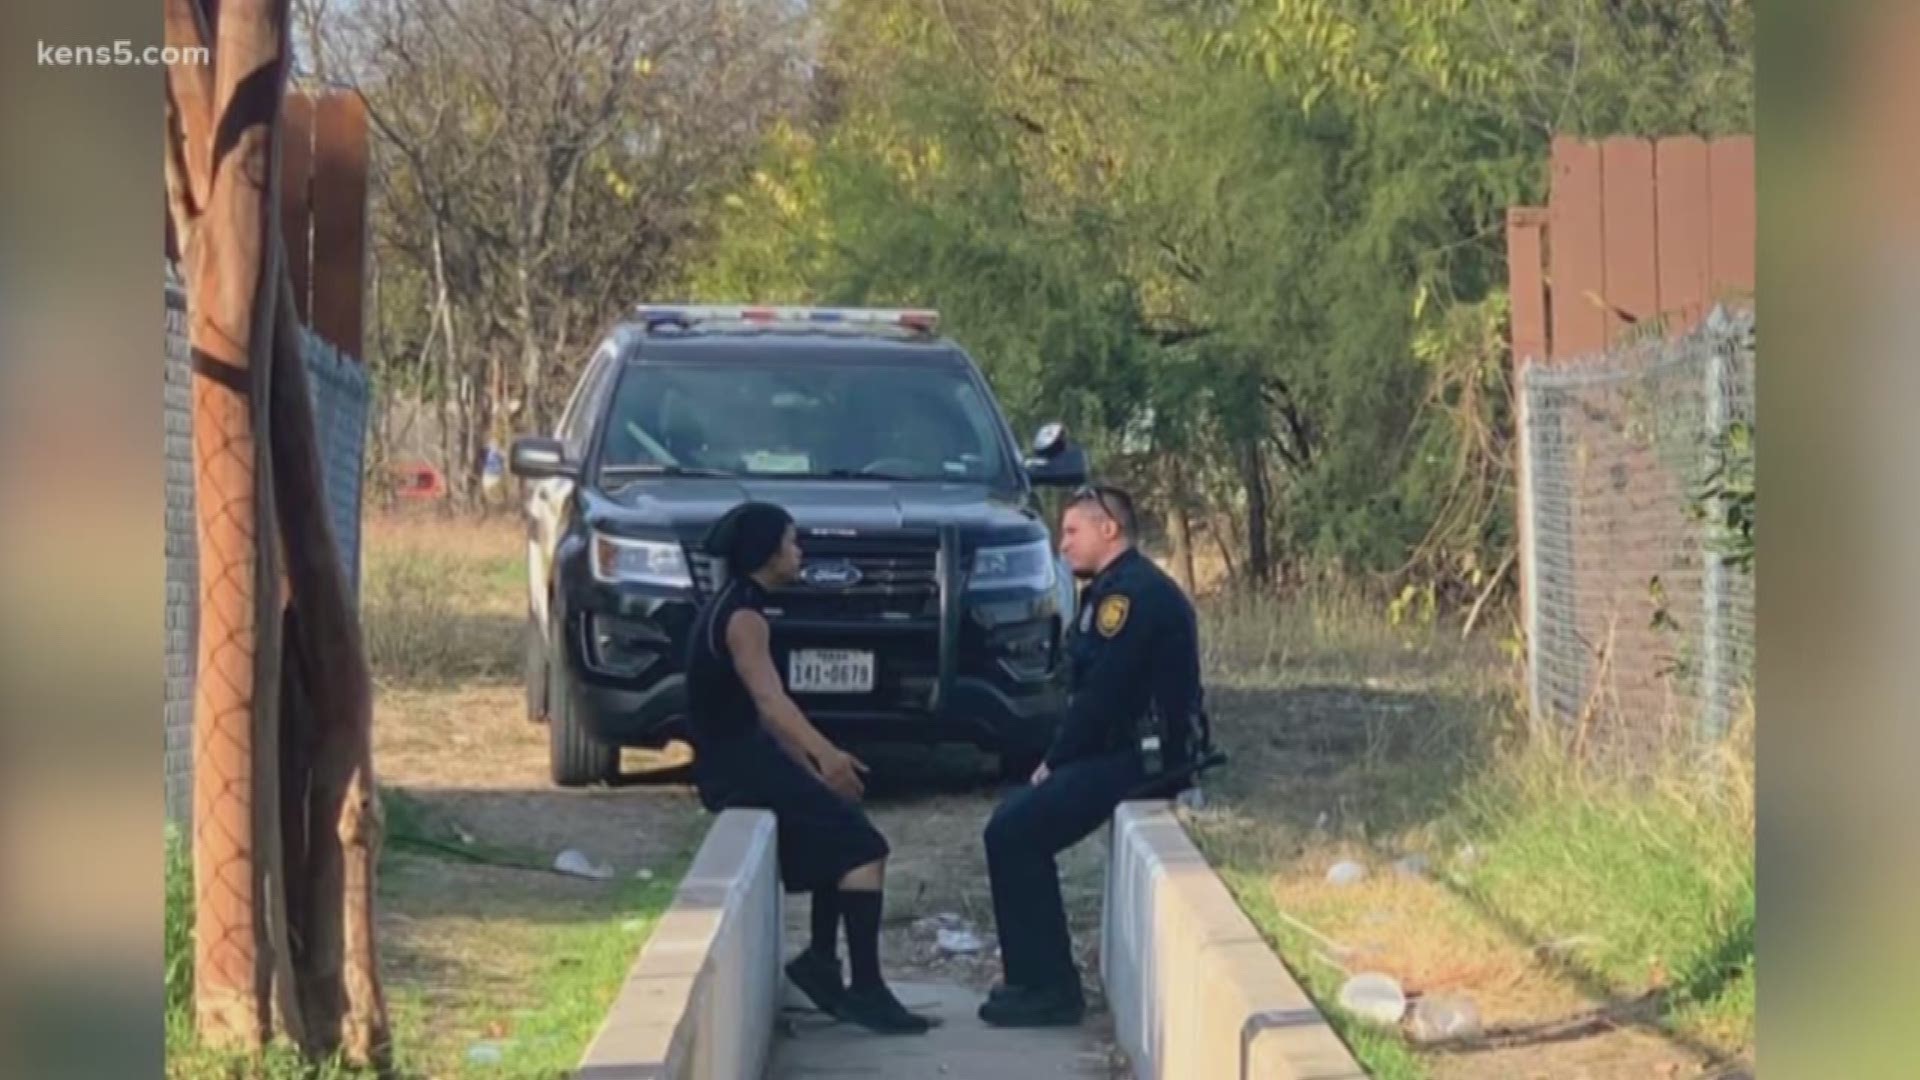 They say a picture is worth a thousand words.

Well, a picture posted by a San Antonio Police officer is garnering more than a thousand words.